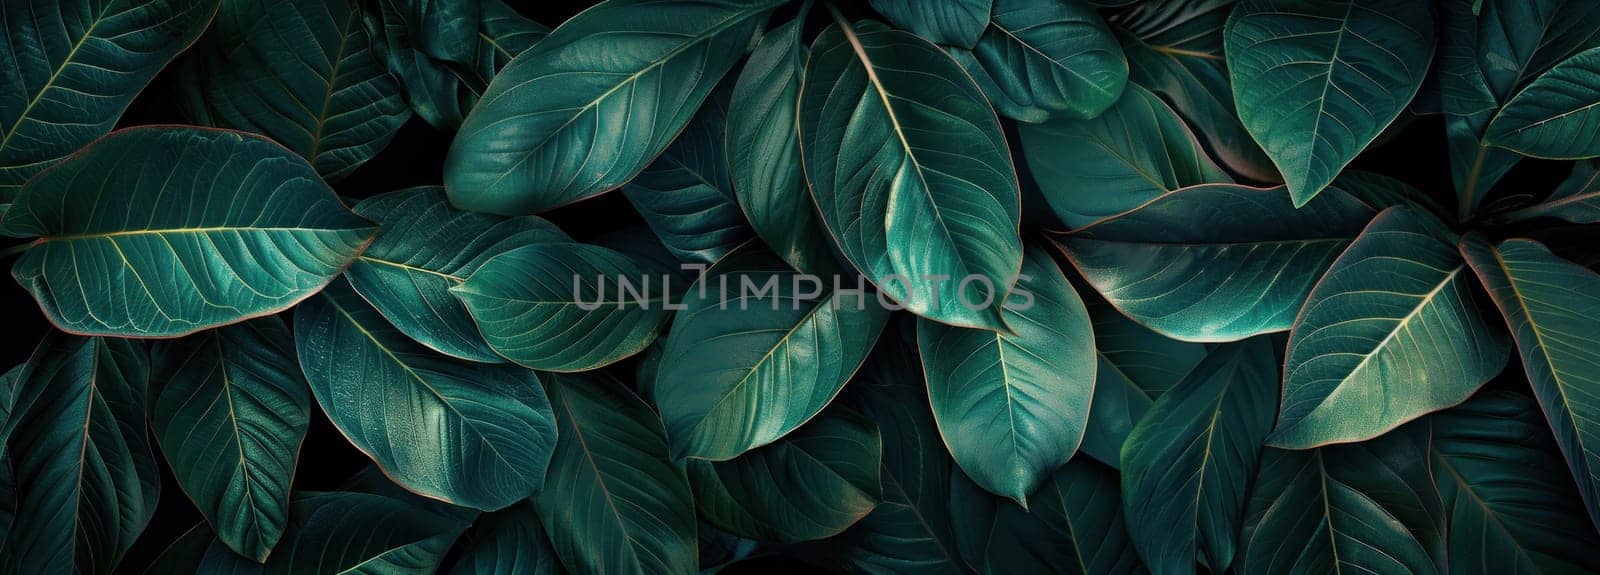 Green leaves close up view on dark background nature's beauty in detail and contrast